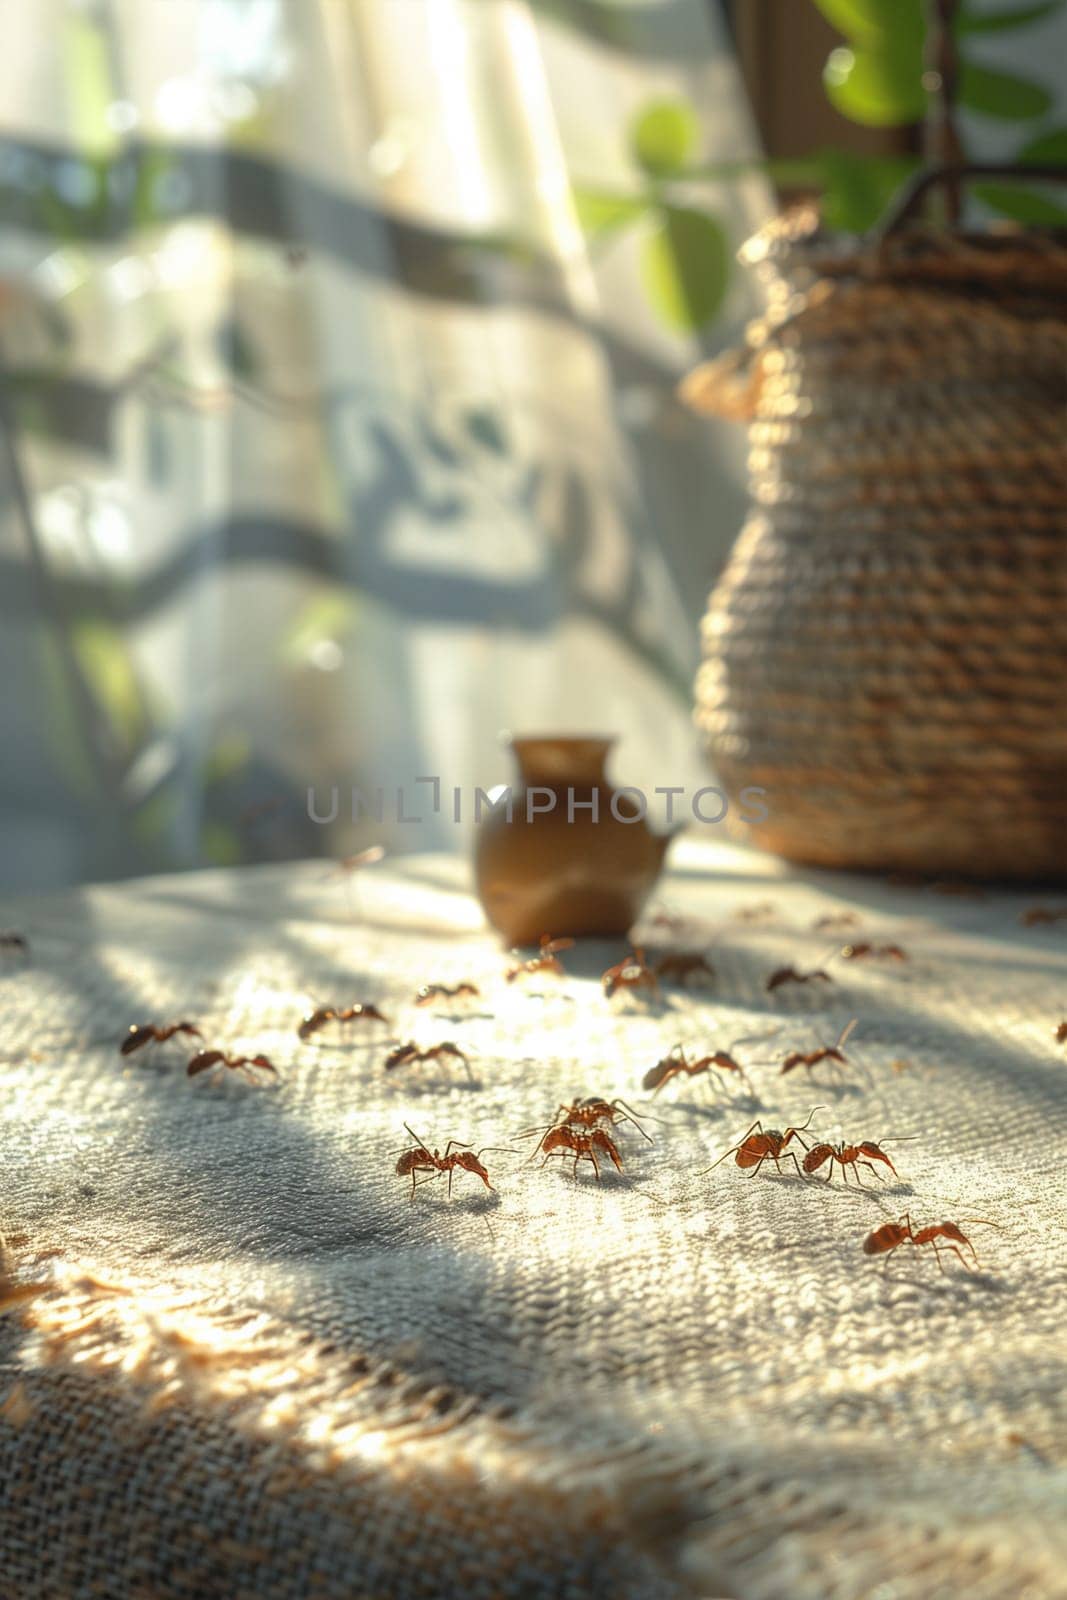 Group of Ants Walking Across Table by Sd28DimoN_1976